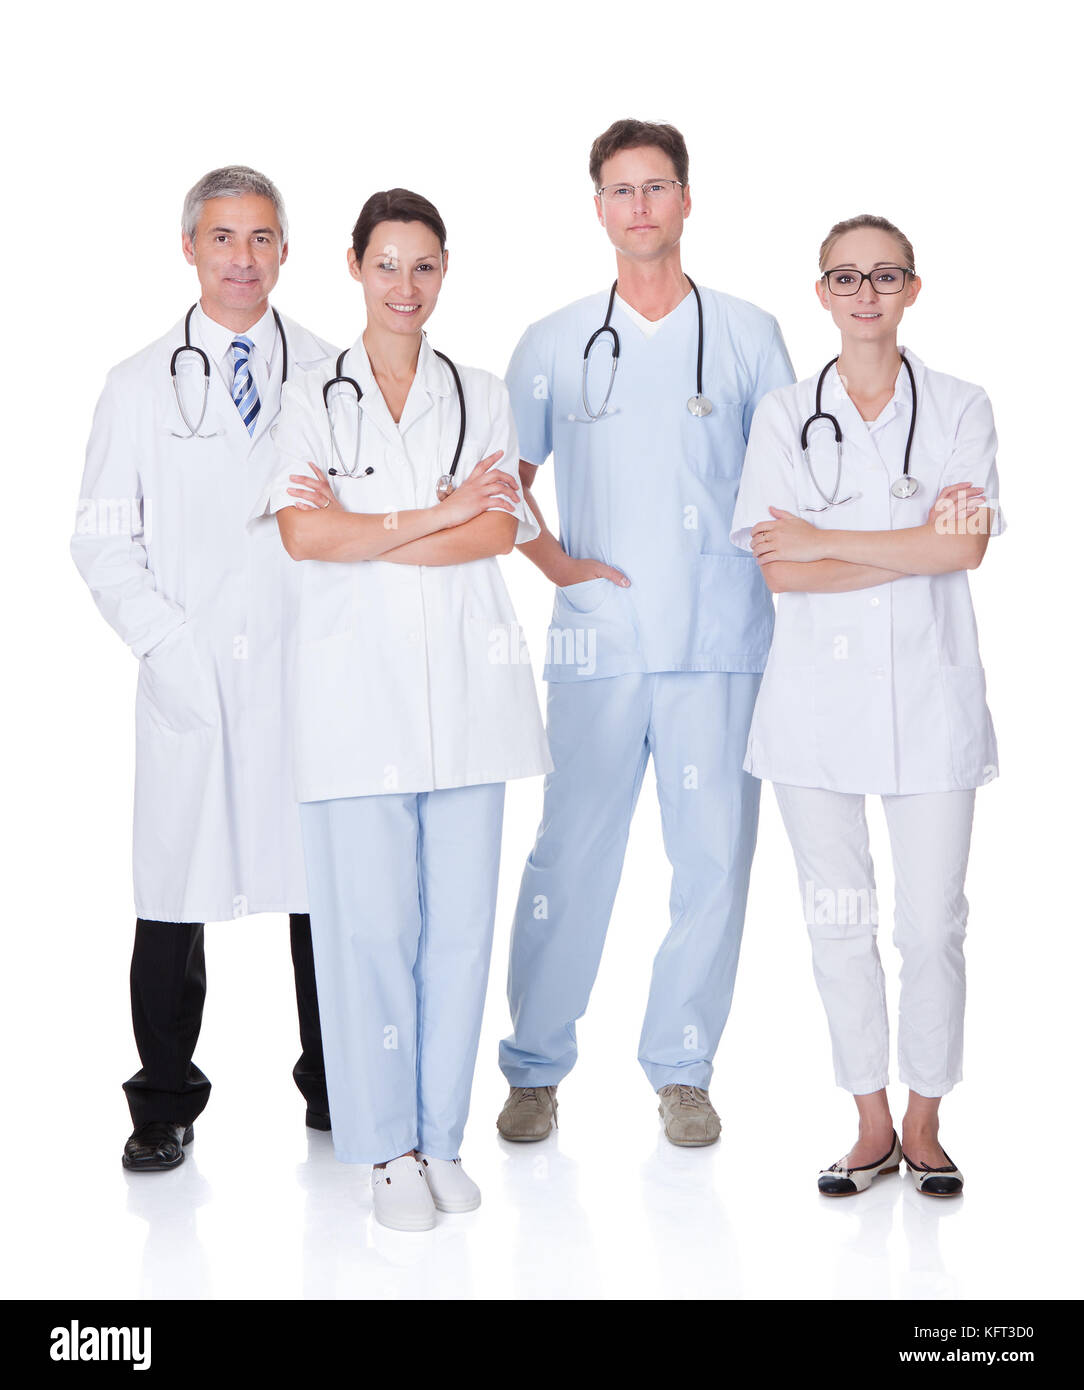 Group of four medical professionals with a male doctor and surgeon and two females doctors on a white studio background Stock Photo